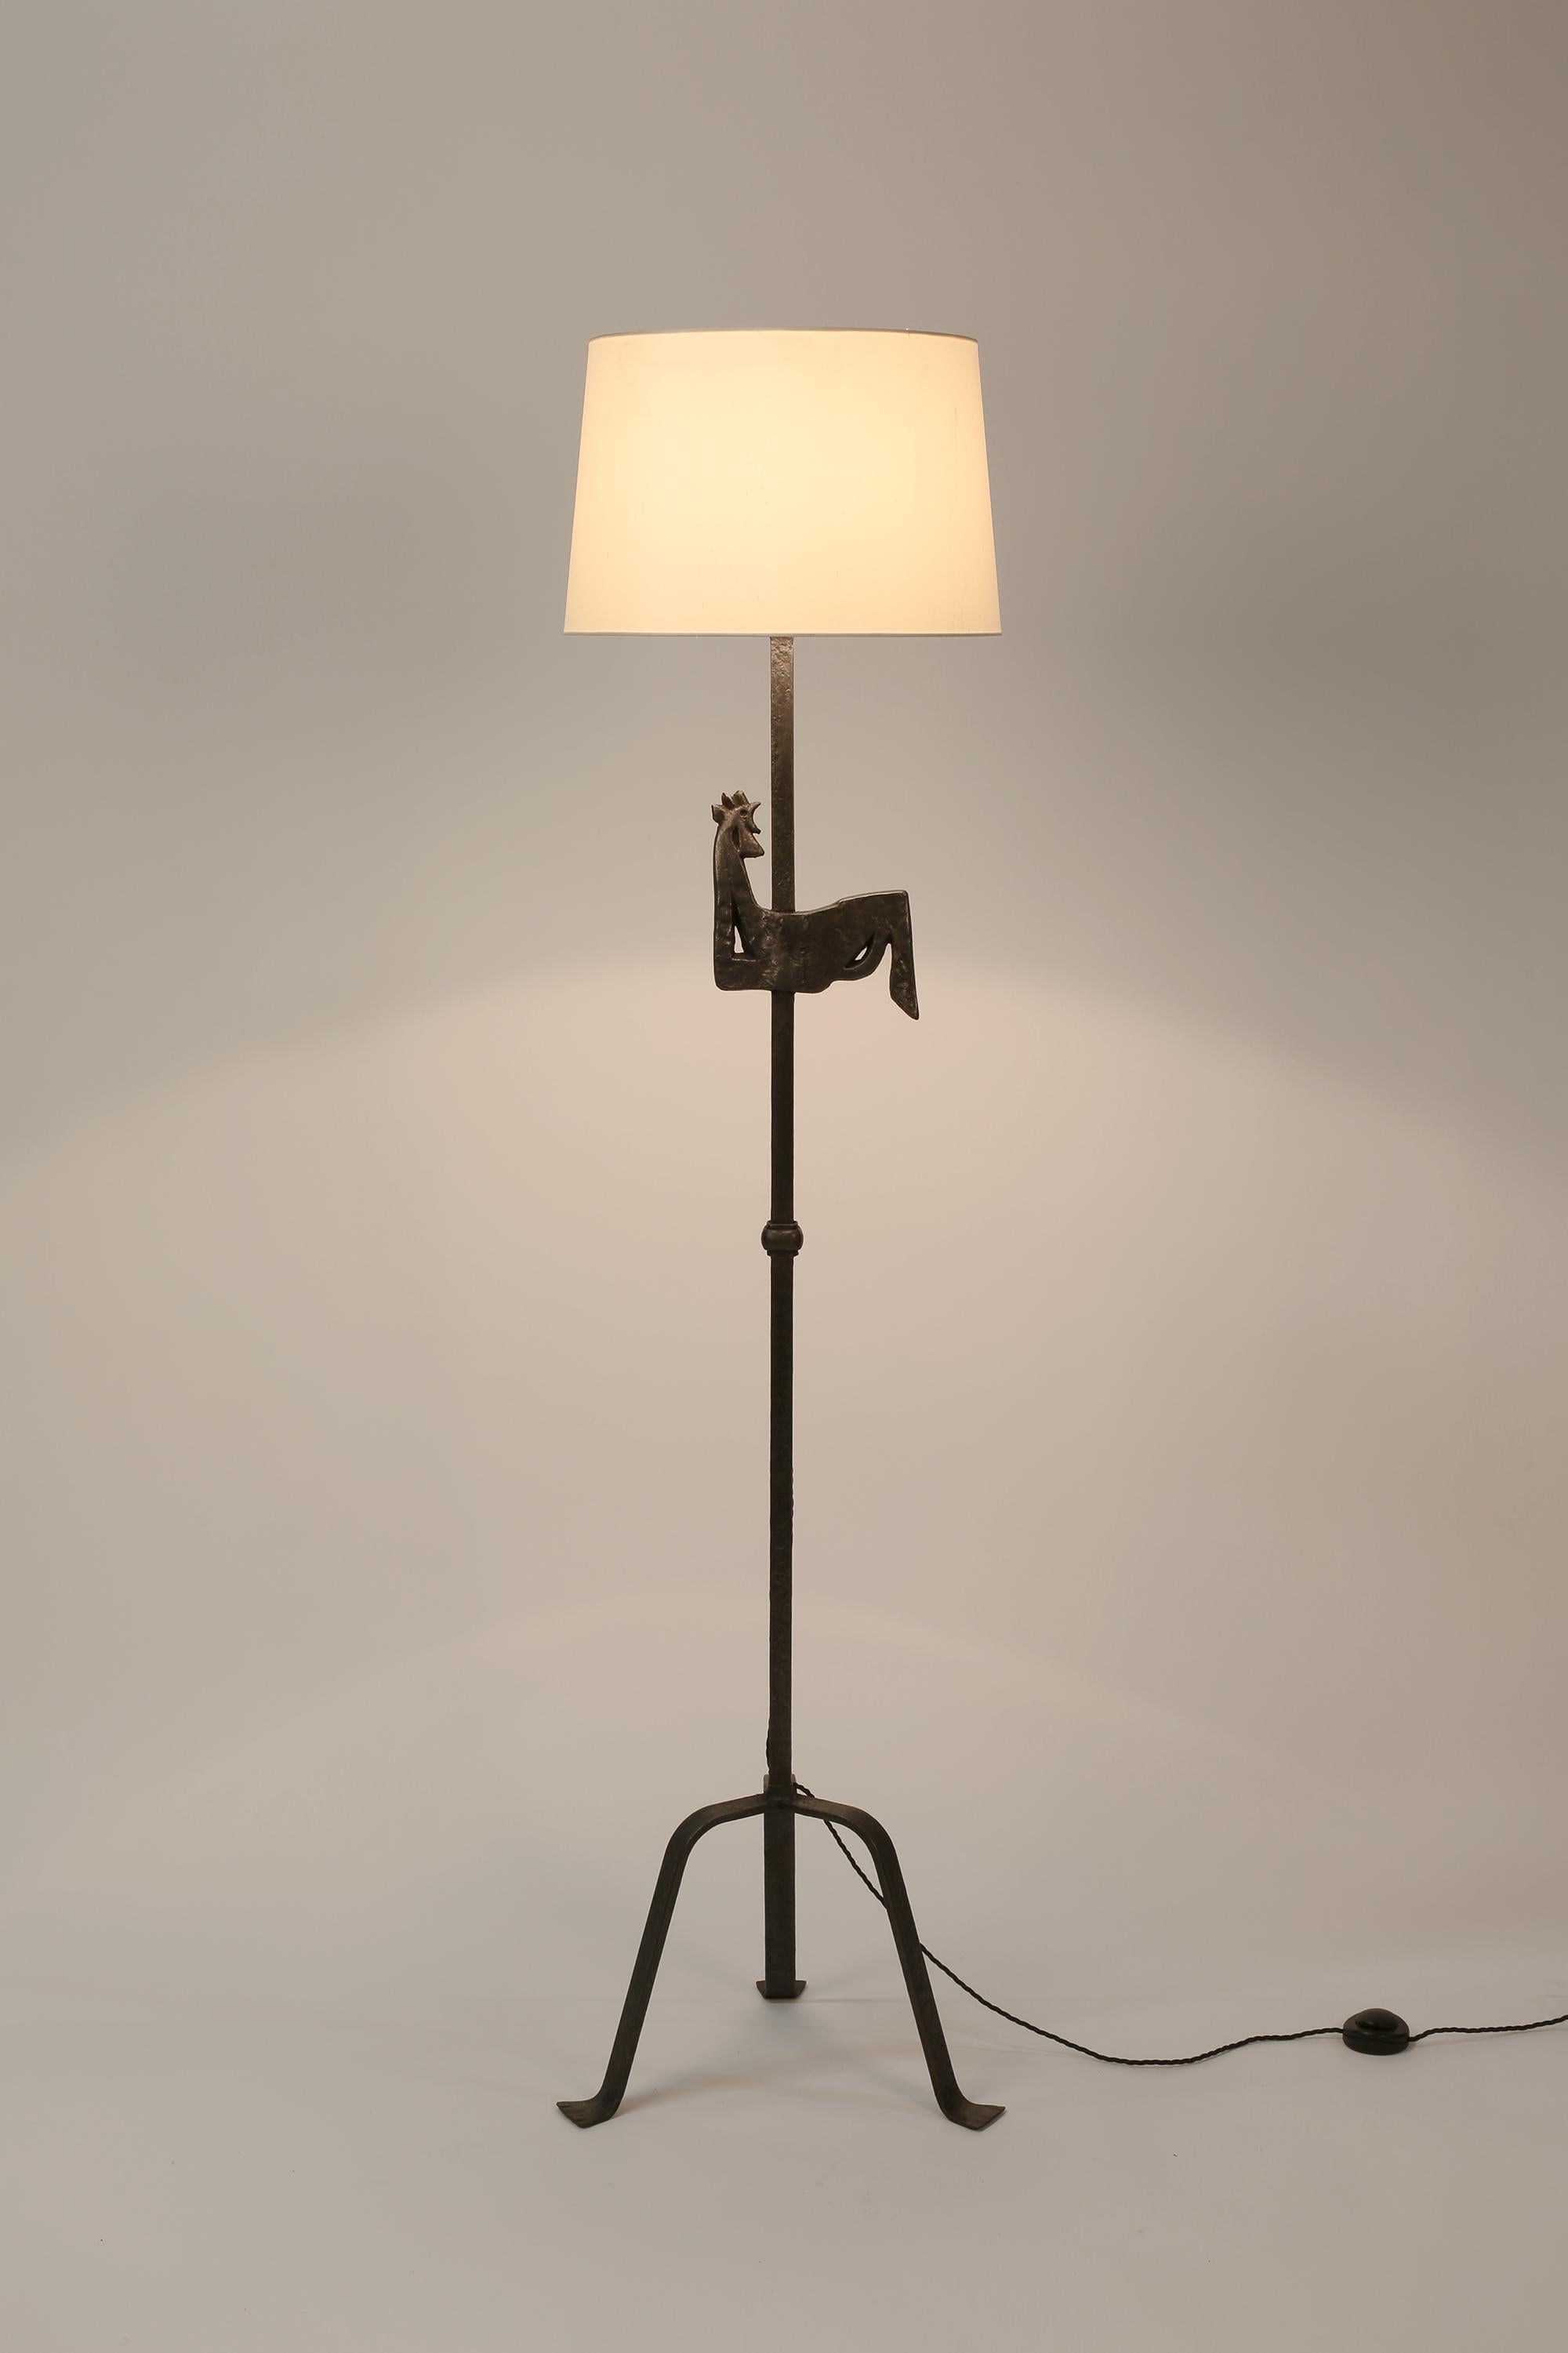 A forged iron floor lamp with stylised cockerel motif, knopped stem and tripod base. A model often attributed to Henri Vion for Les Artisans de Marolles, under the artistic direction of Jean Touret. French, c. 1950s. Supplied with a tapered